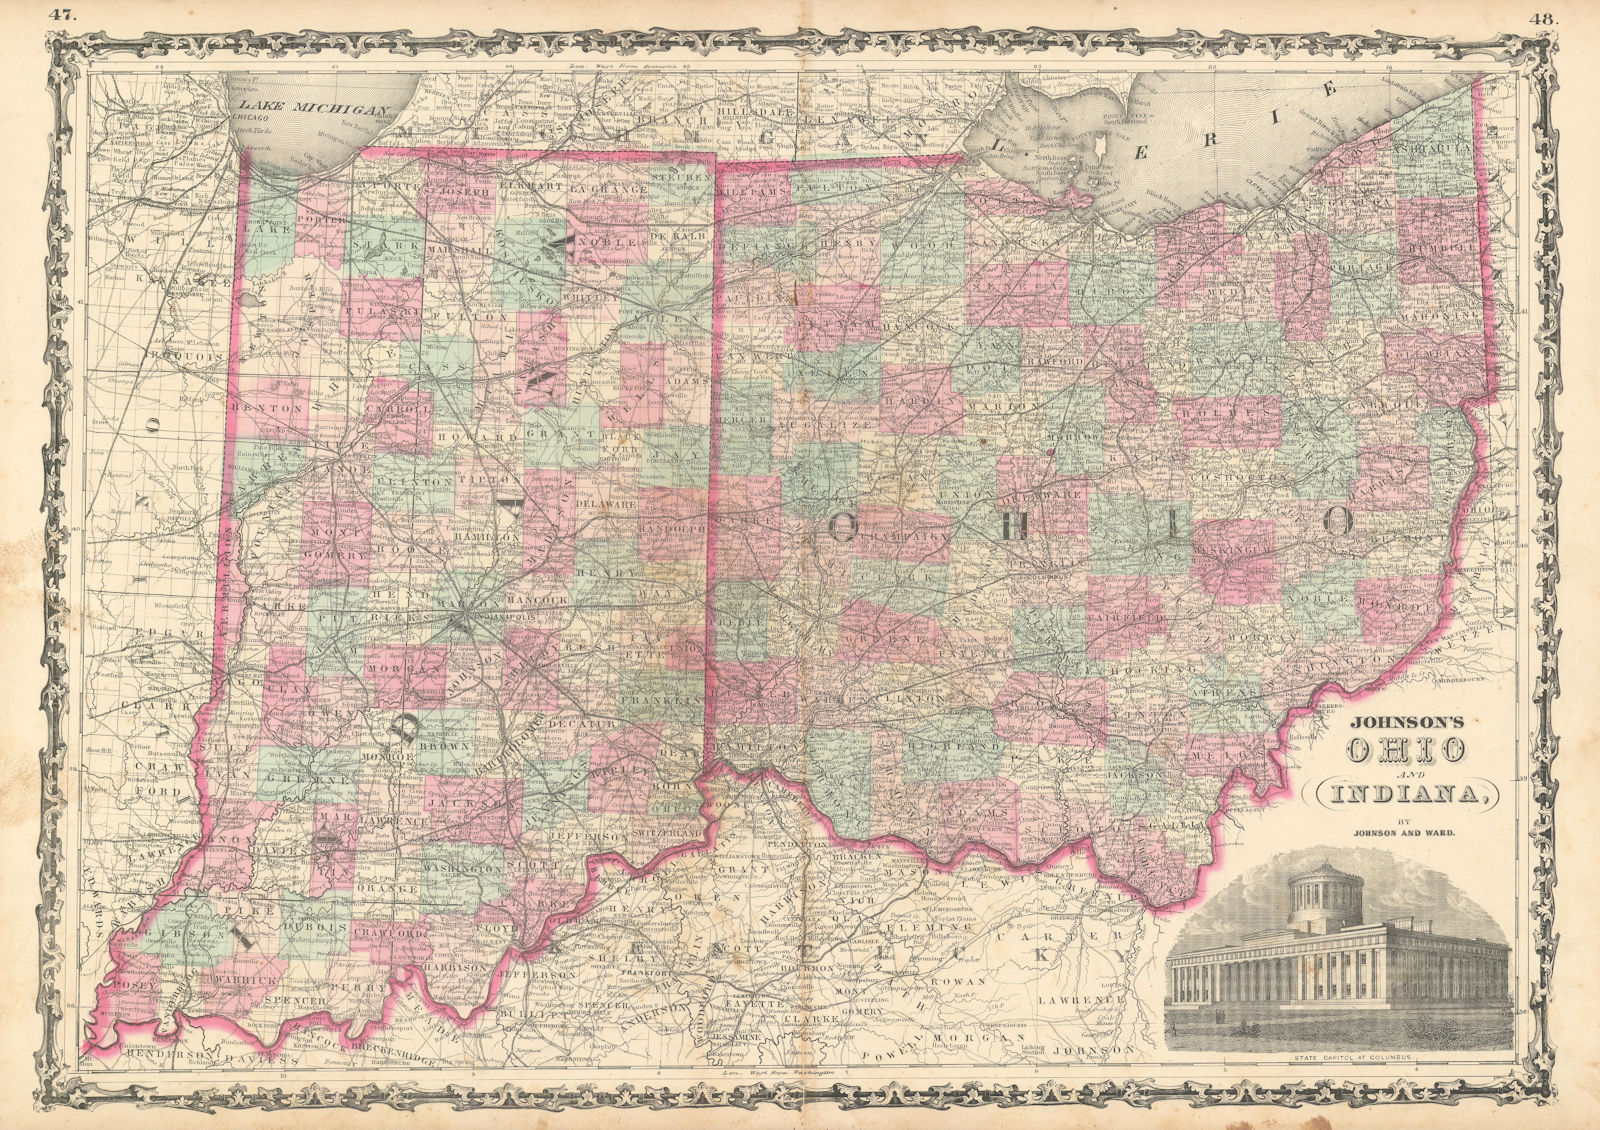 Johnson's Ohio & Indiana. US state map showing counties 1863 old antique